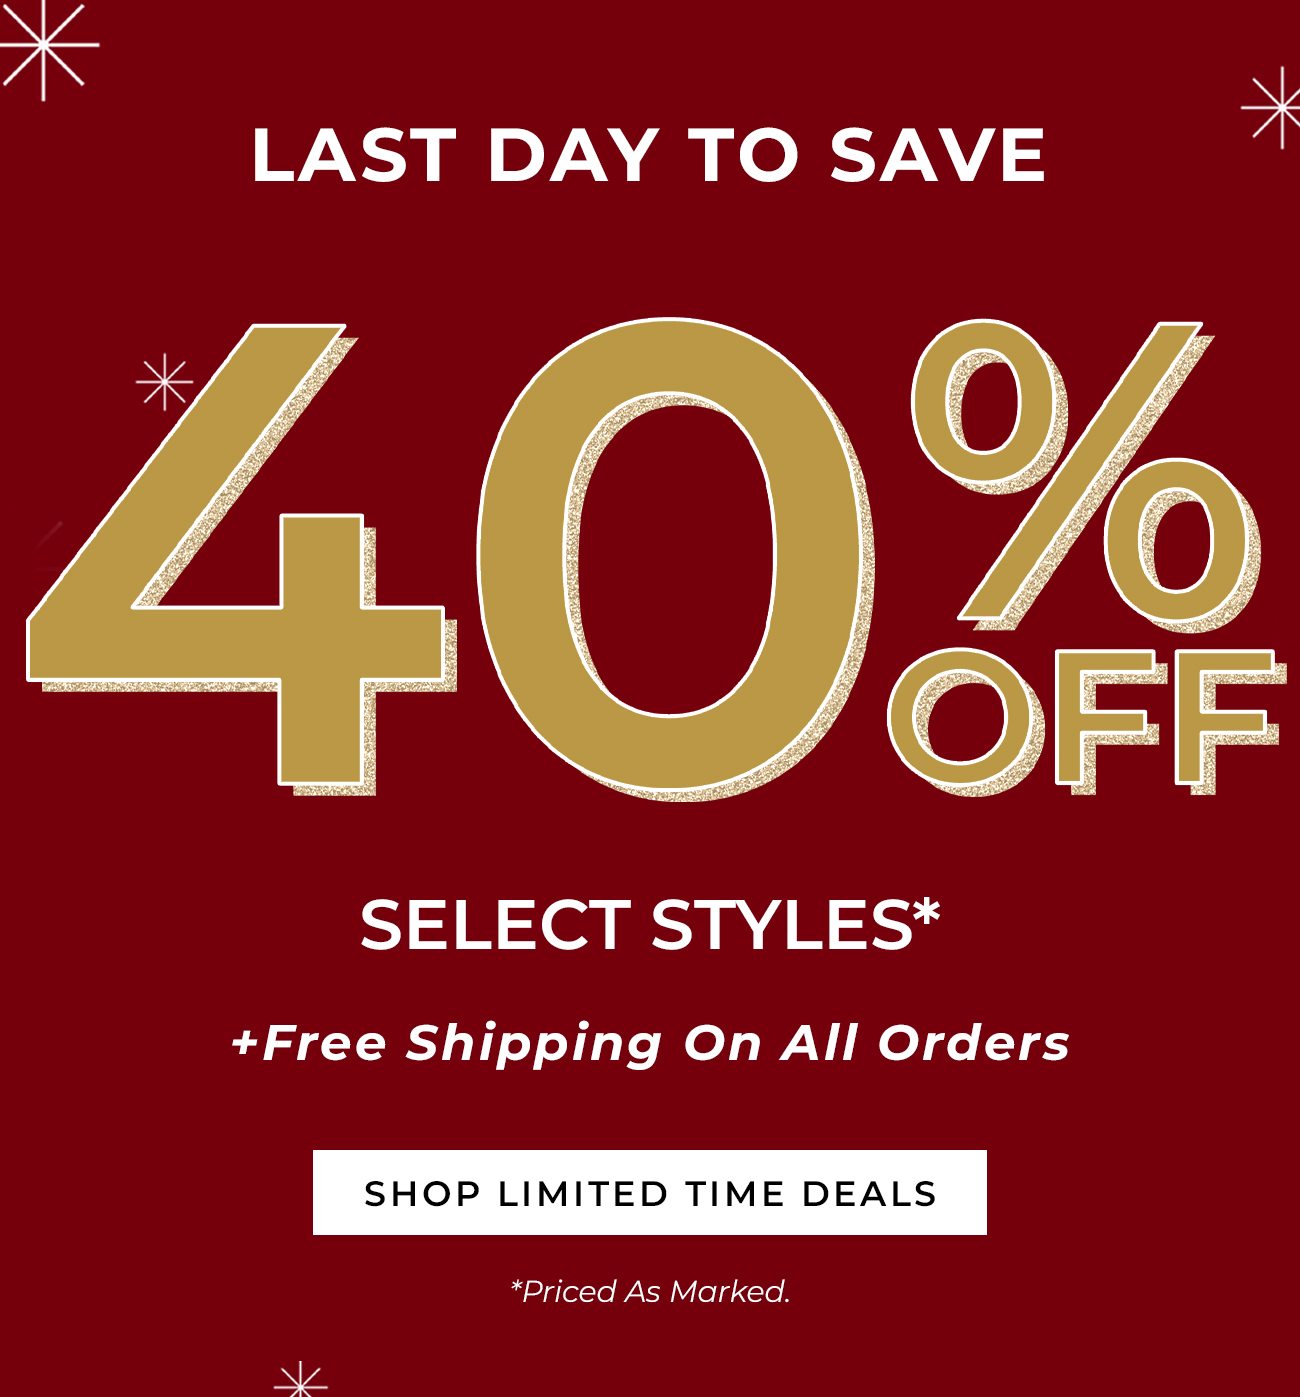 Last Day To Save - 40% Off Select Styles + Free Shipping On All Orders